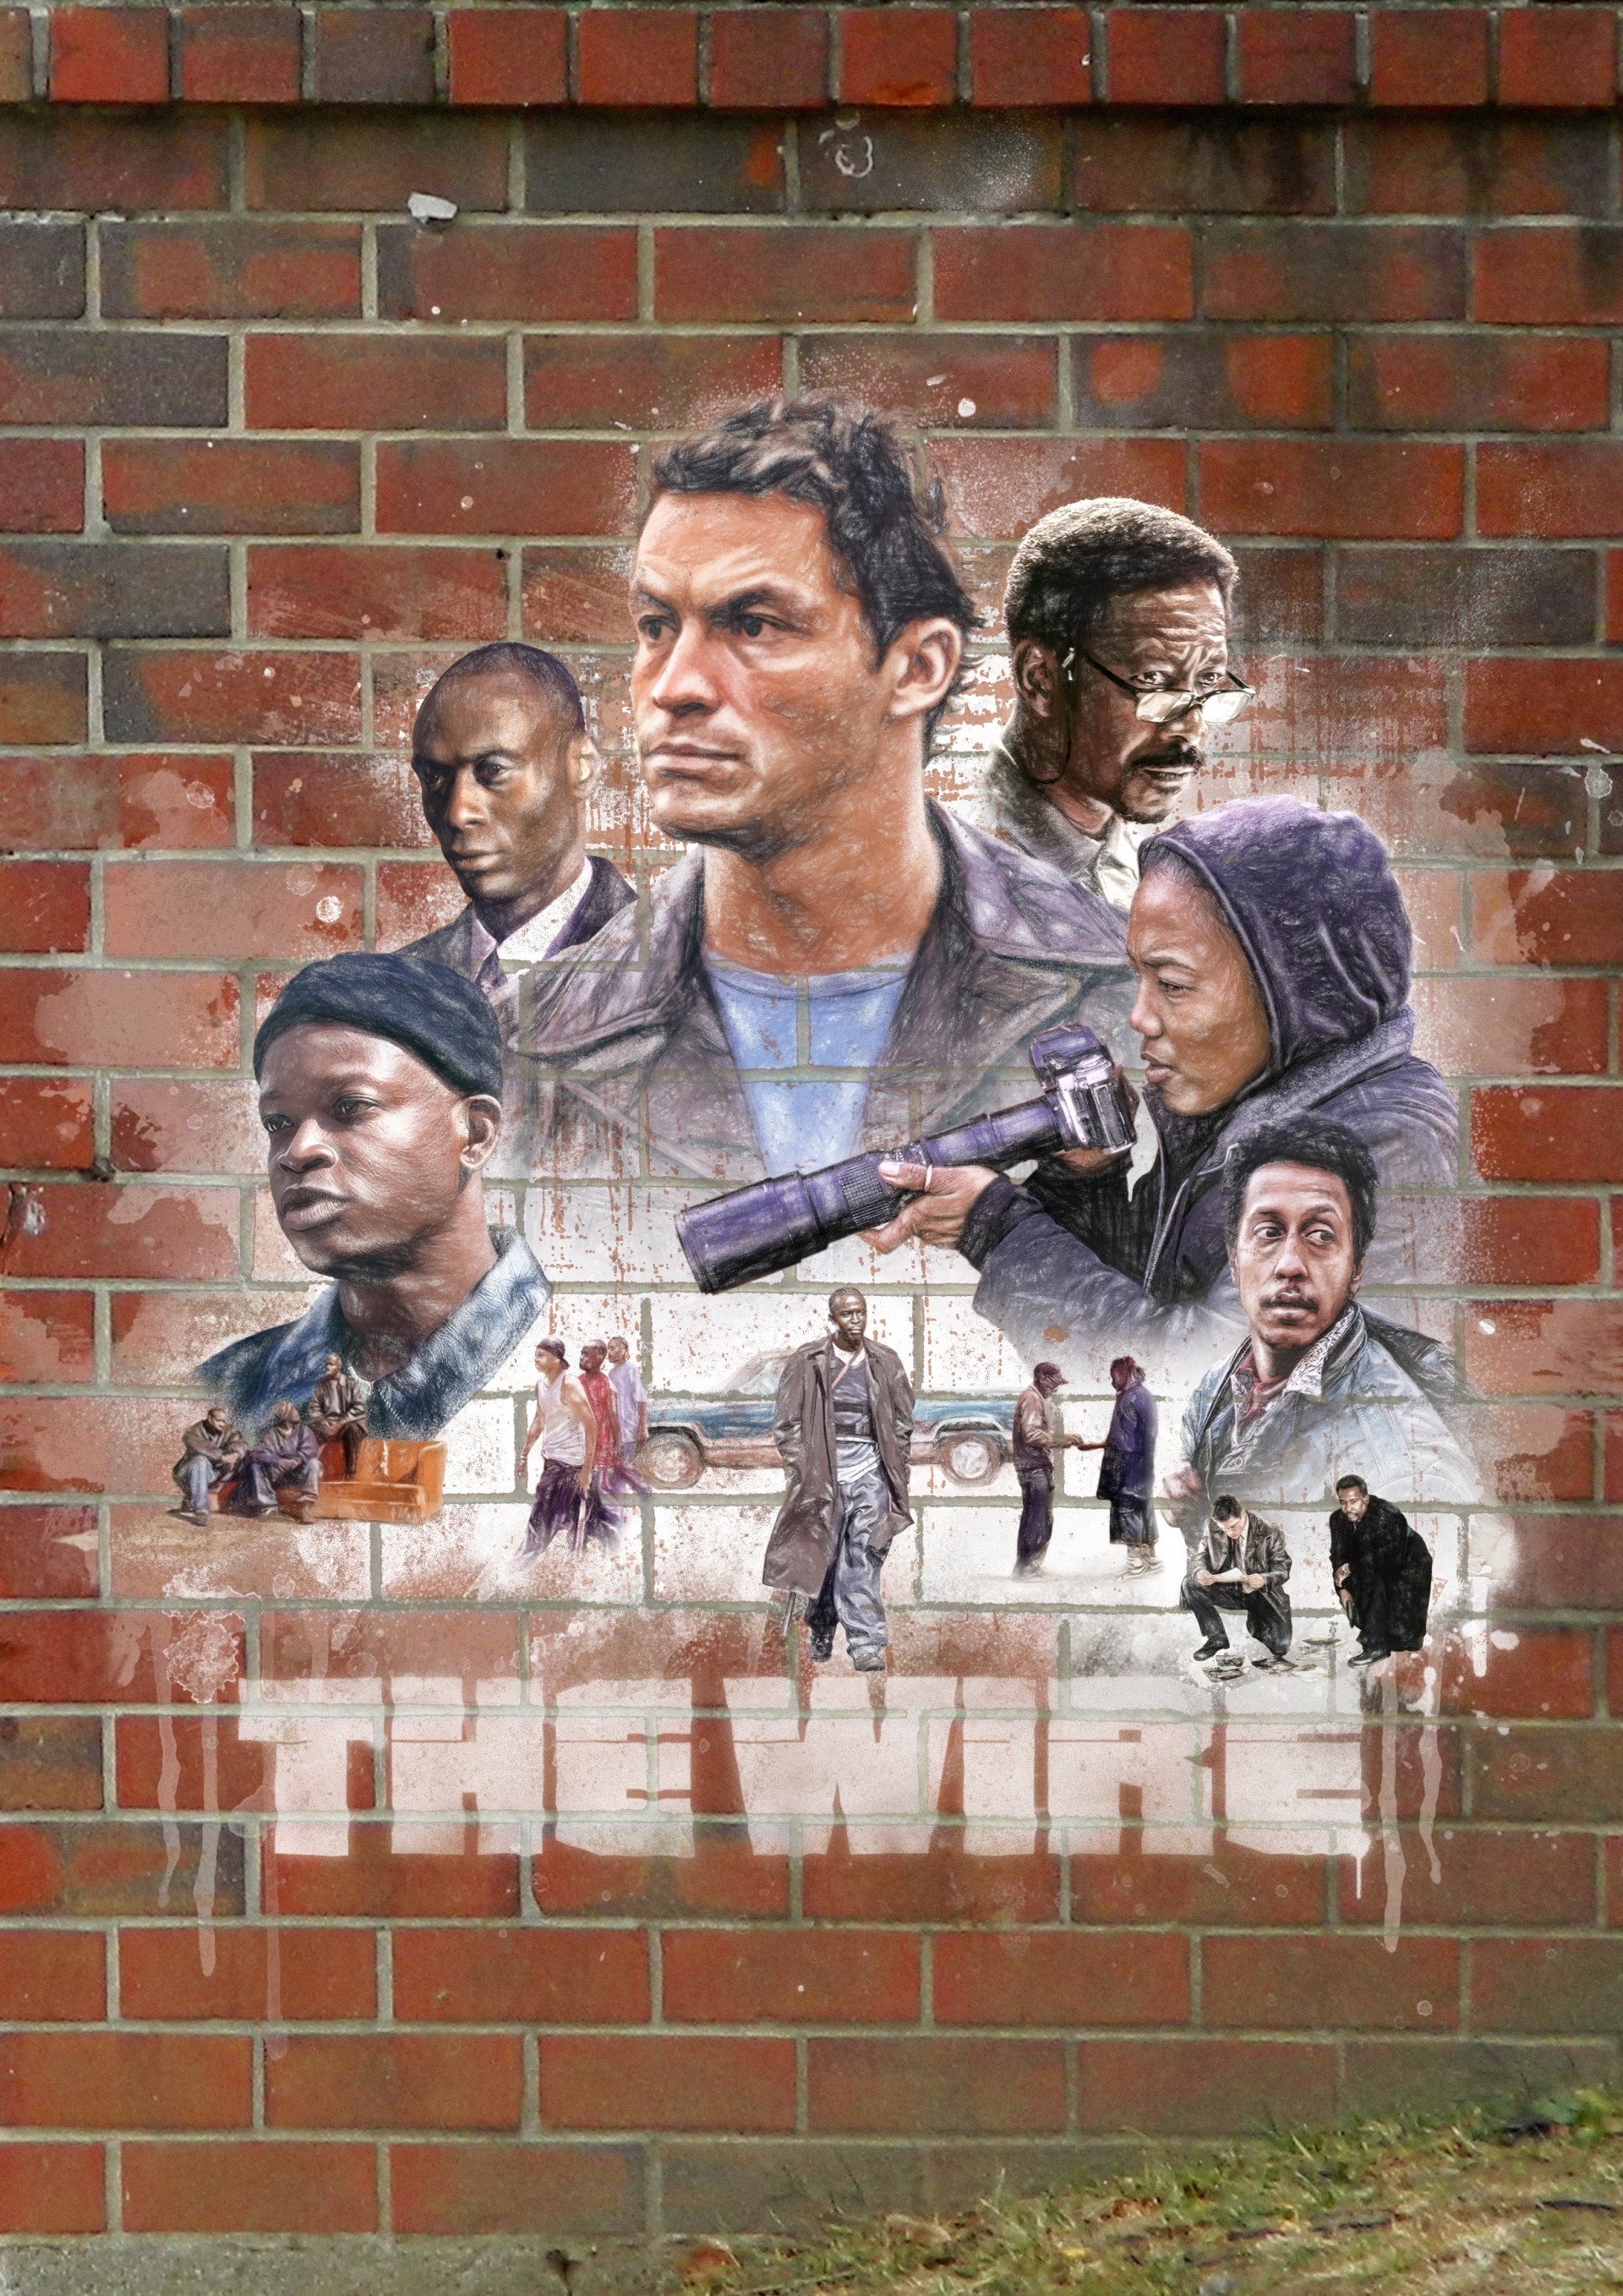 Sorin Ilie - The Wire Season 1 Poster